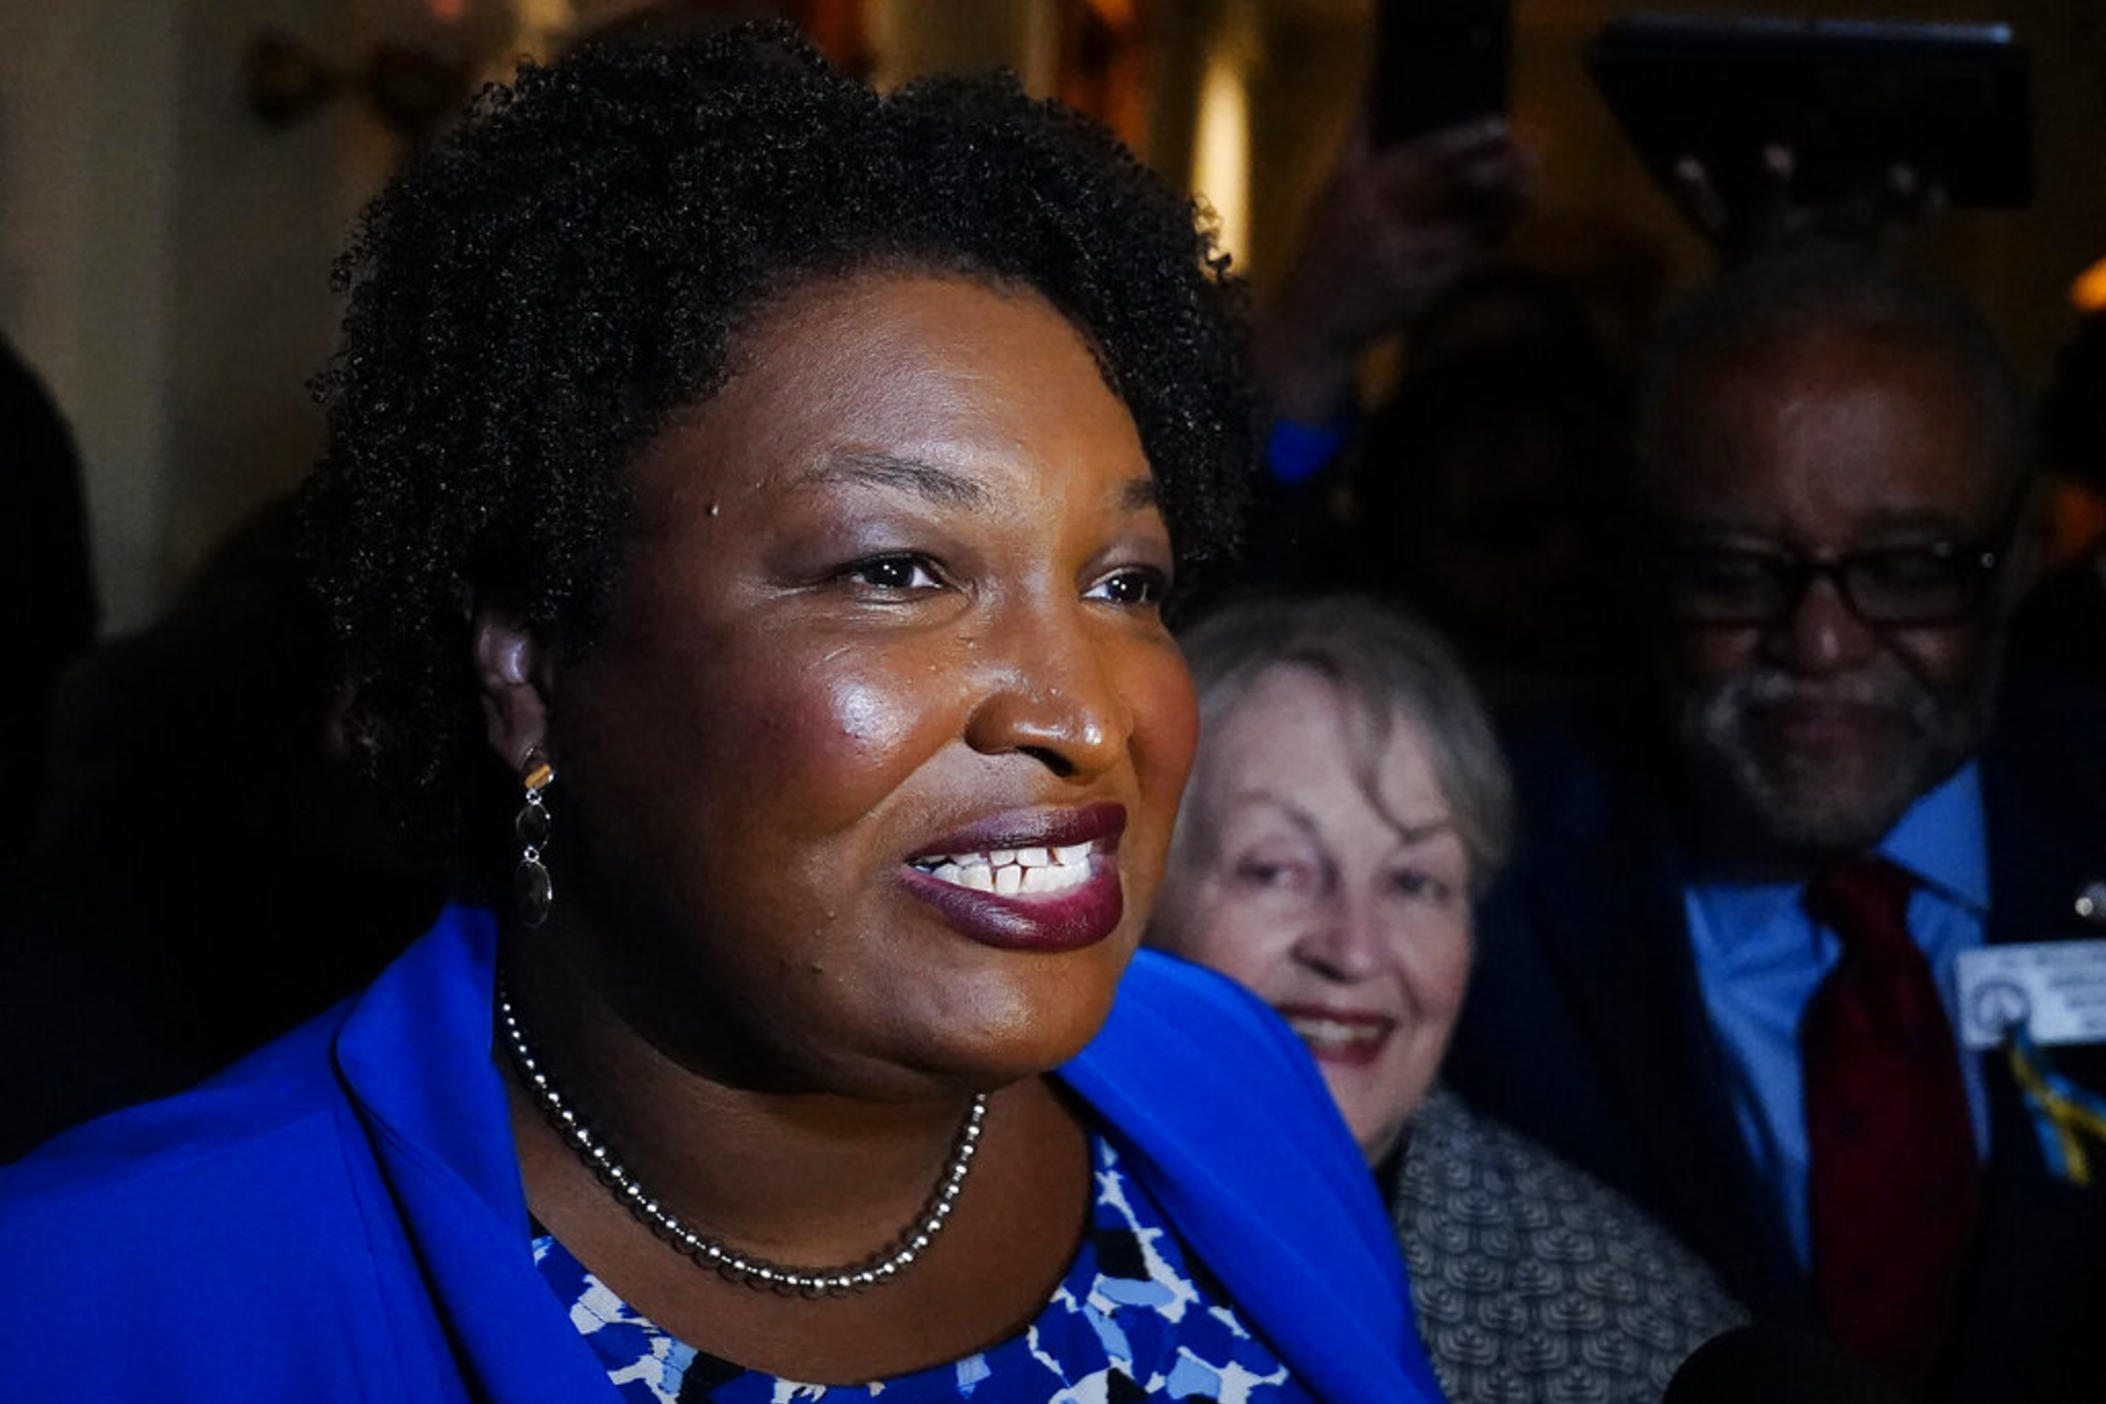 Georgia gubernatorial Democratic candidate Stacey Abrams talks to the media after qualifying for the 2022 election on Tuesday, March 8, 2022, in Atlanta. Abrams has become a millionaire. A disclosure filed in March shows the candidate for governor is worth $3.17 million, thanks mostly to book and speaking income. Abrams was worth $109,000 in 2018 when she first ran for governor.